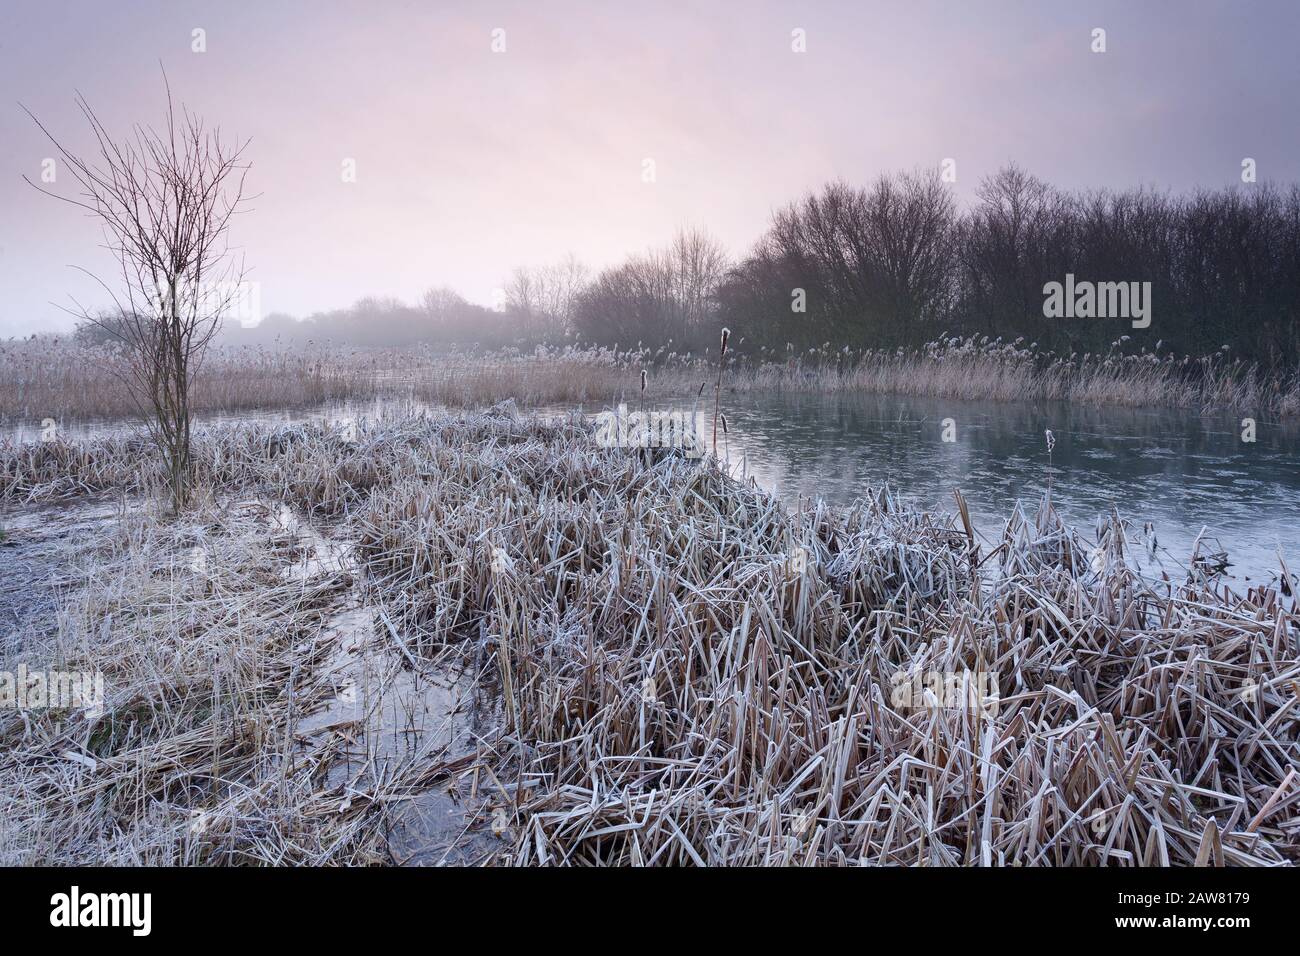 Barton-upon-Humber, North Lincolnshire, UK. 7th February 2020. UK Weather: A cold and frosty Winter morning in February. Credit: LEE BEEL/Alamy Live News. Stock Photo